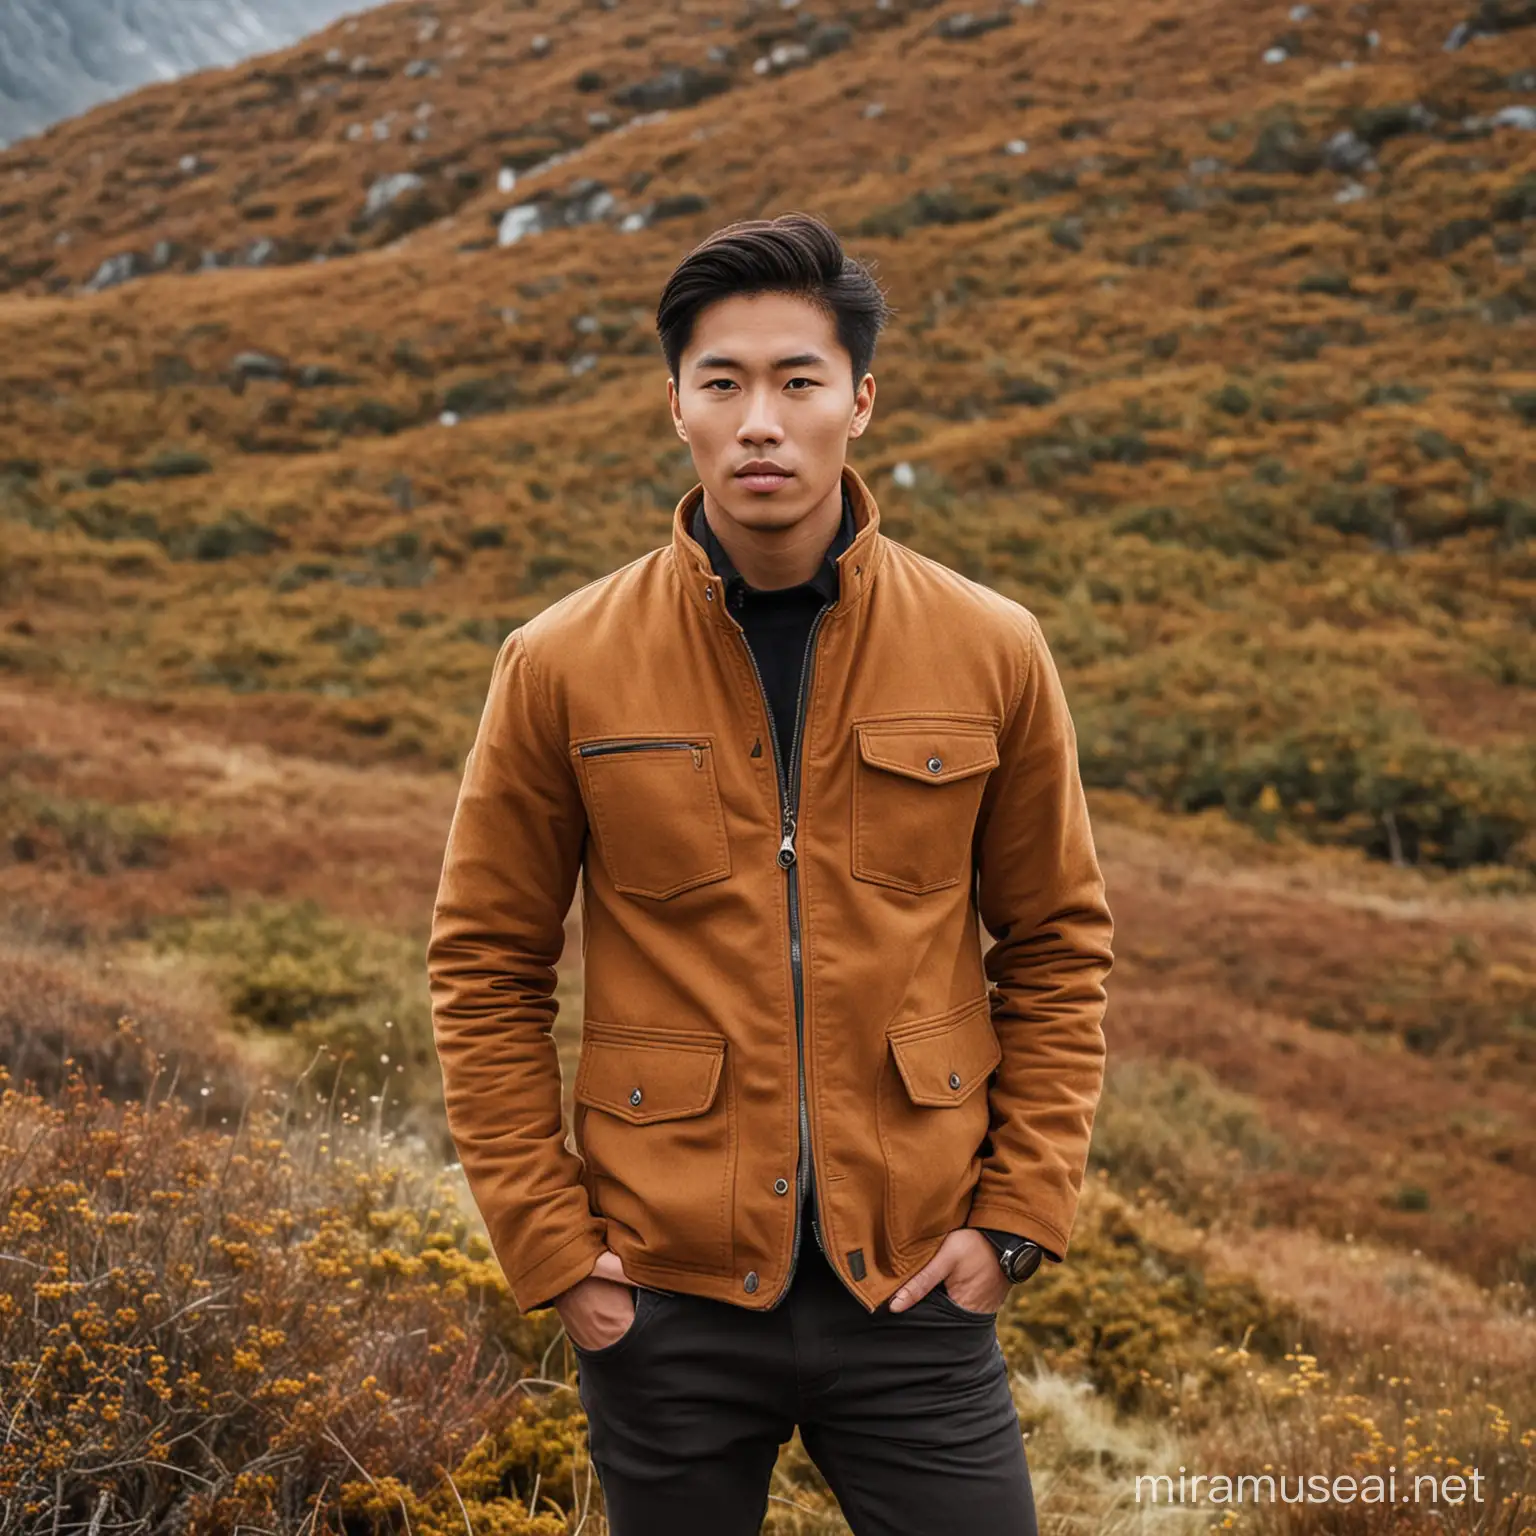 model picture of a asian guy in a brown jacket  in the Norwegian nature
